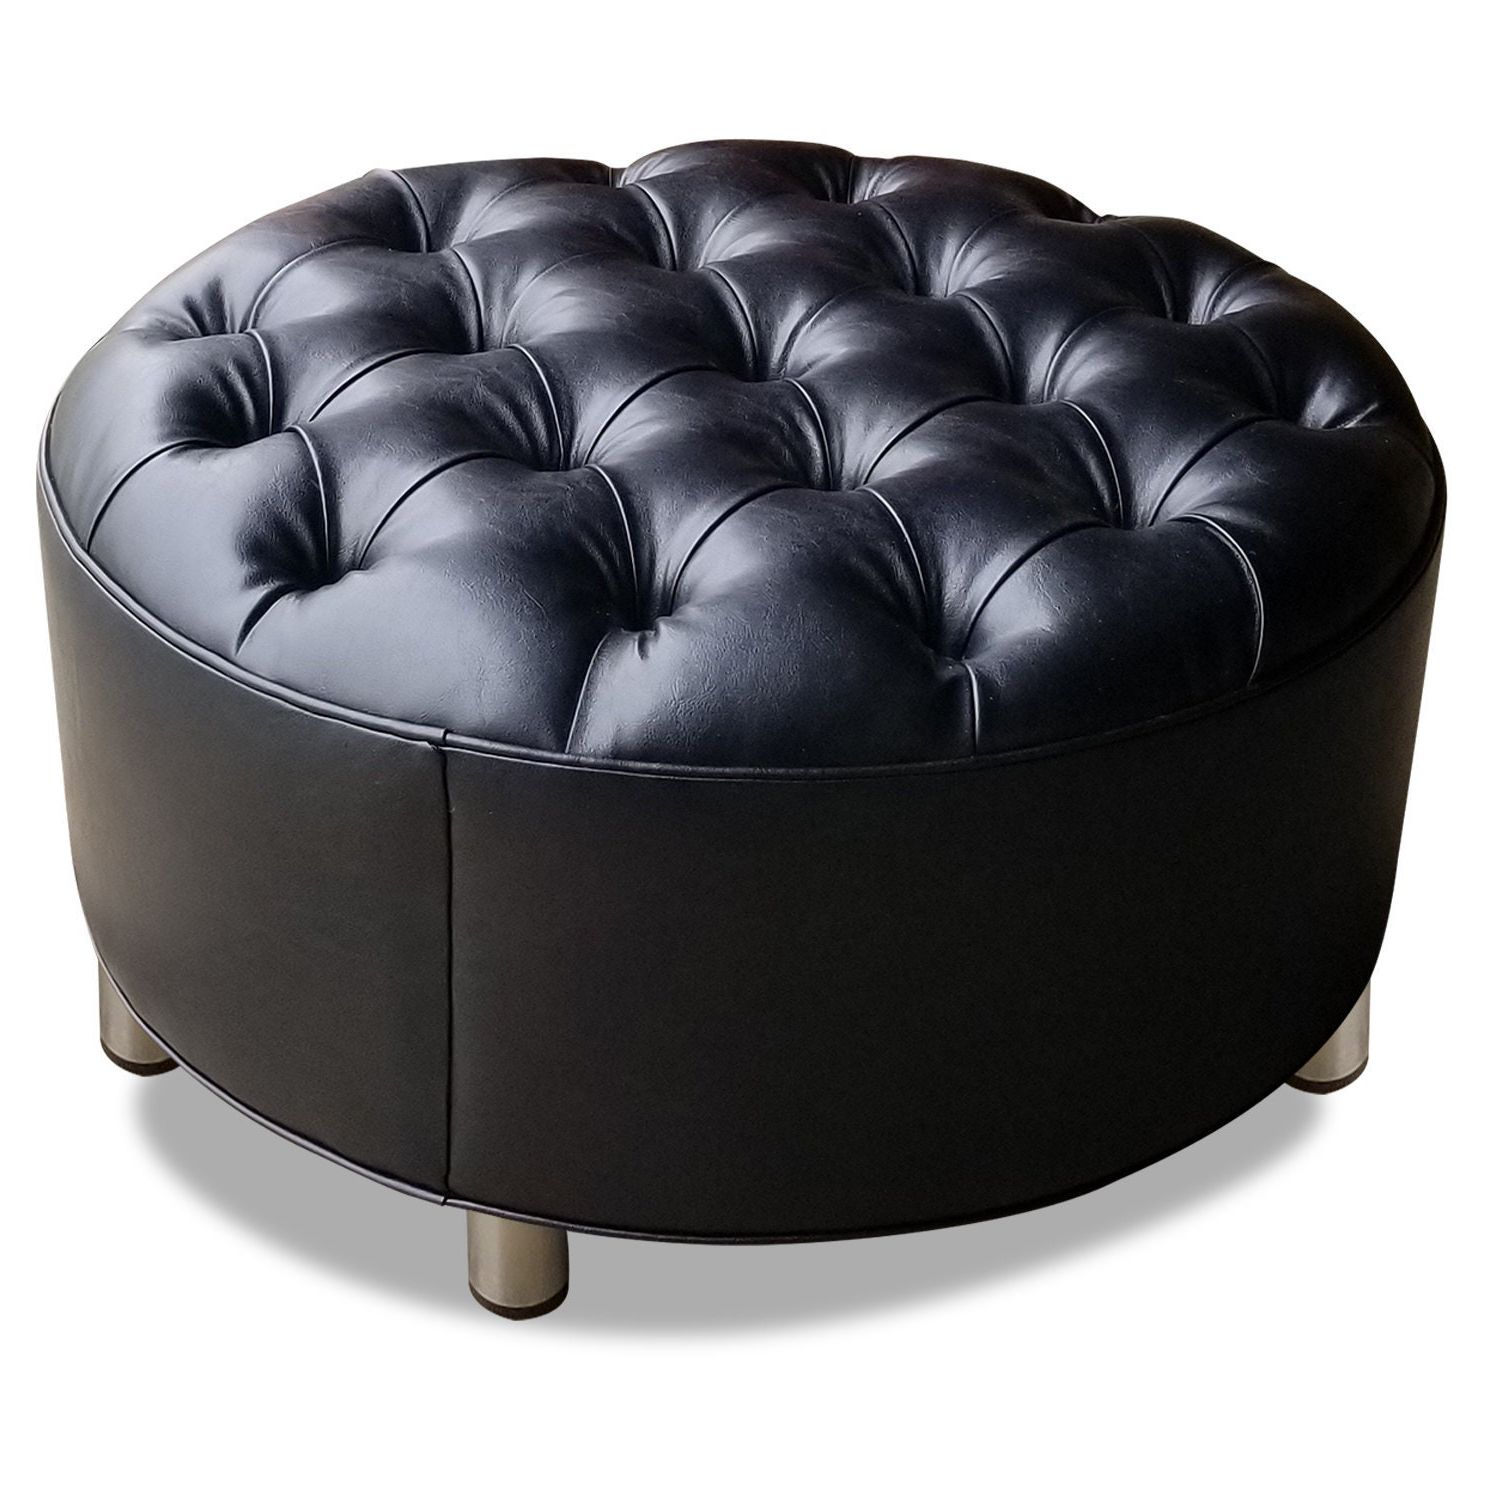 Weathered Ivory Leather Hide Pouf Ottomans Within Fashionable Modern Round Ottoman, Tufted, Black Vegan Leather, Chrome Metal Legs (View 4 of 10)